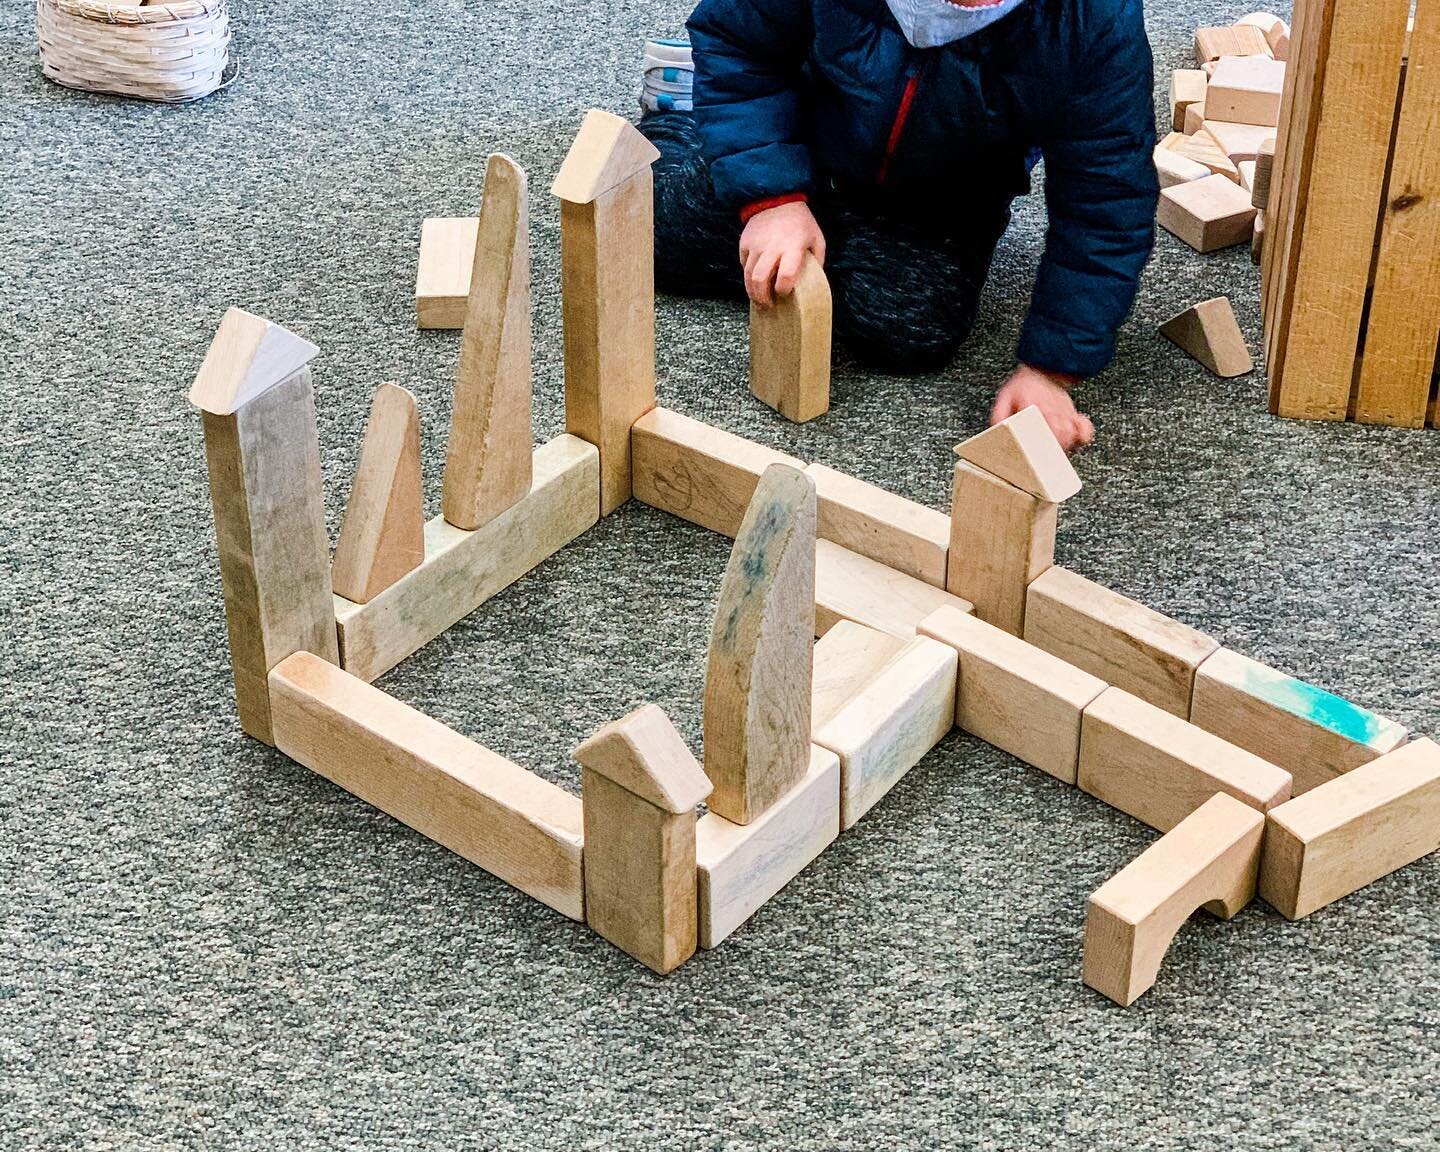 Can you guess what this is? 🏰

Image Description: A student builds a castle with wooden blocks.

#preschool #preschoolActivities #EarlyChildhoodEducation #TactileLearning #GlendalePreschool #PreschoolLife #PreschoolIsFun #GlendaleCA #PreschoolRocks 